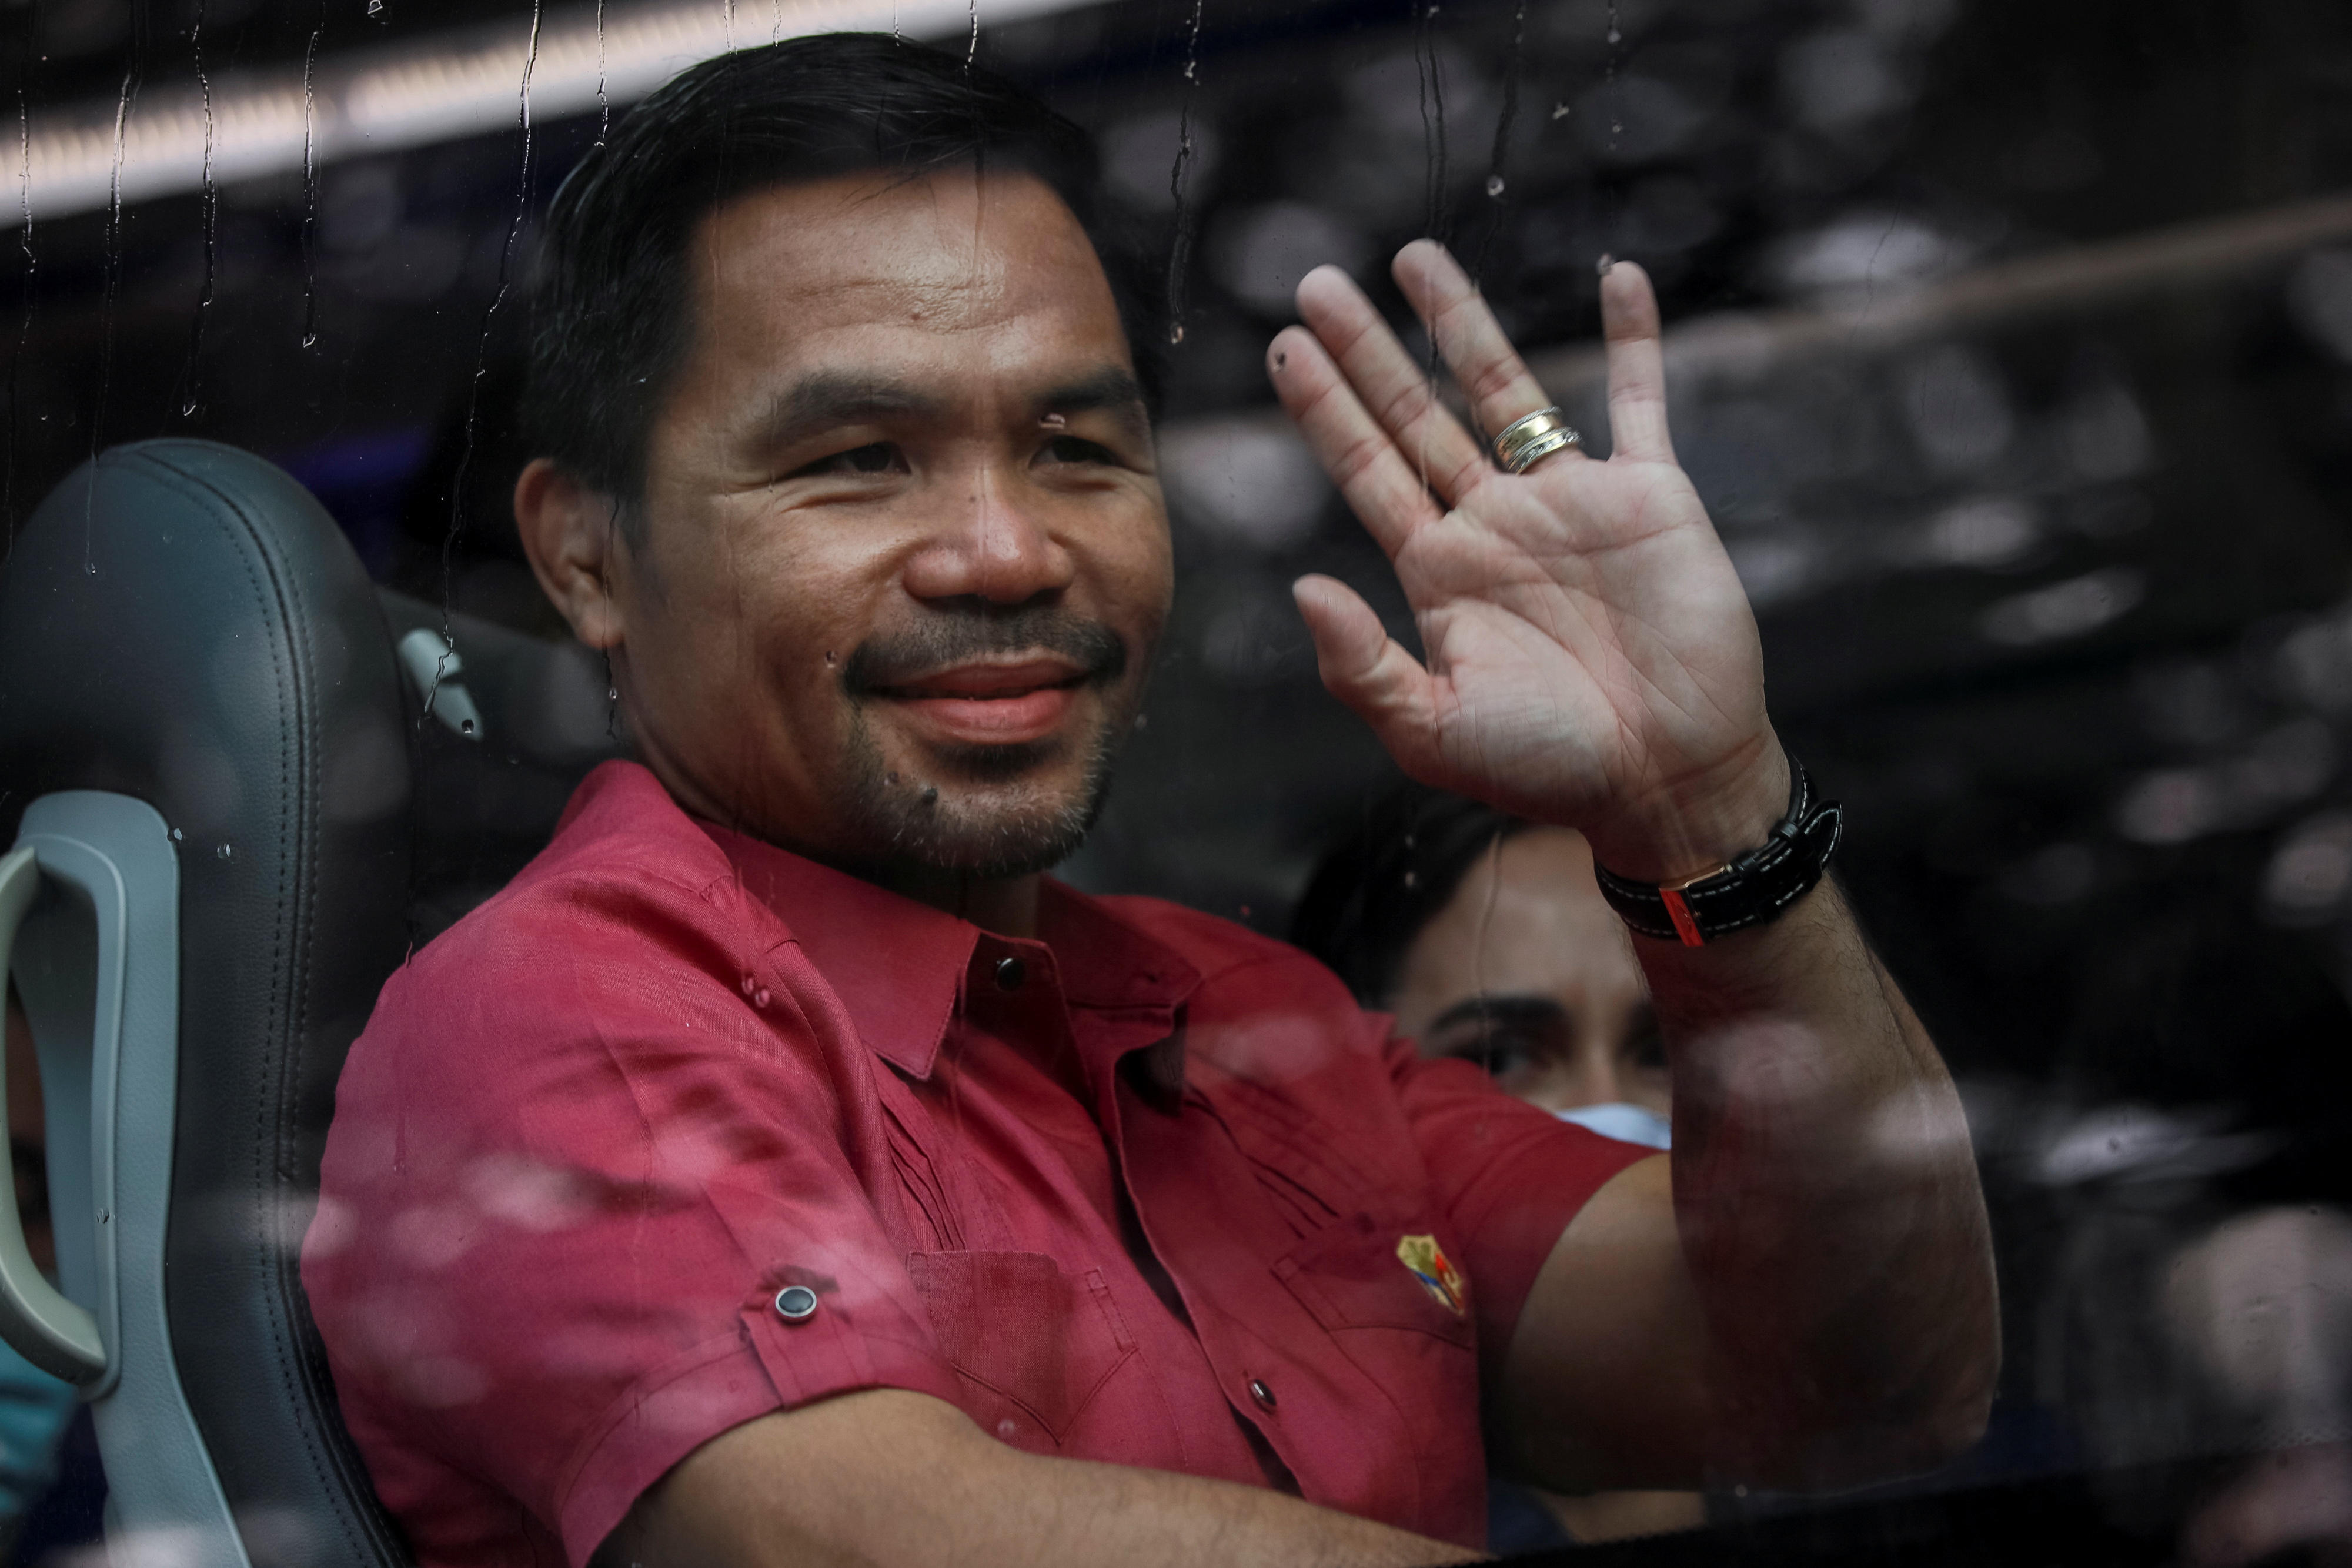 Philippine senator and newly retired boxing icon Manny Pacquiao waves from his bus before filing his certificate of candidacy for president, in Pasay City, Metro Manila, Philippines, October 1, 2021. REUTERS/Eloisa Lopez